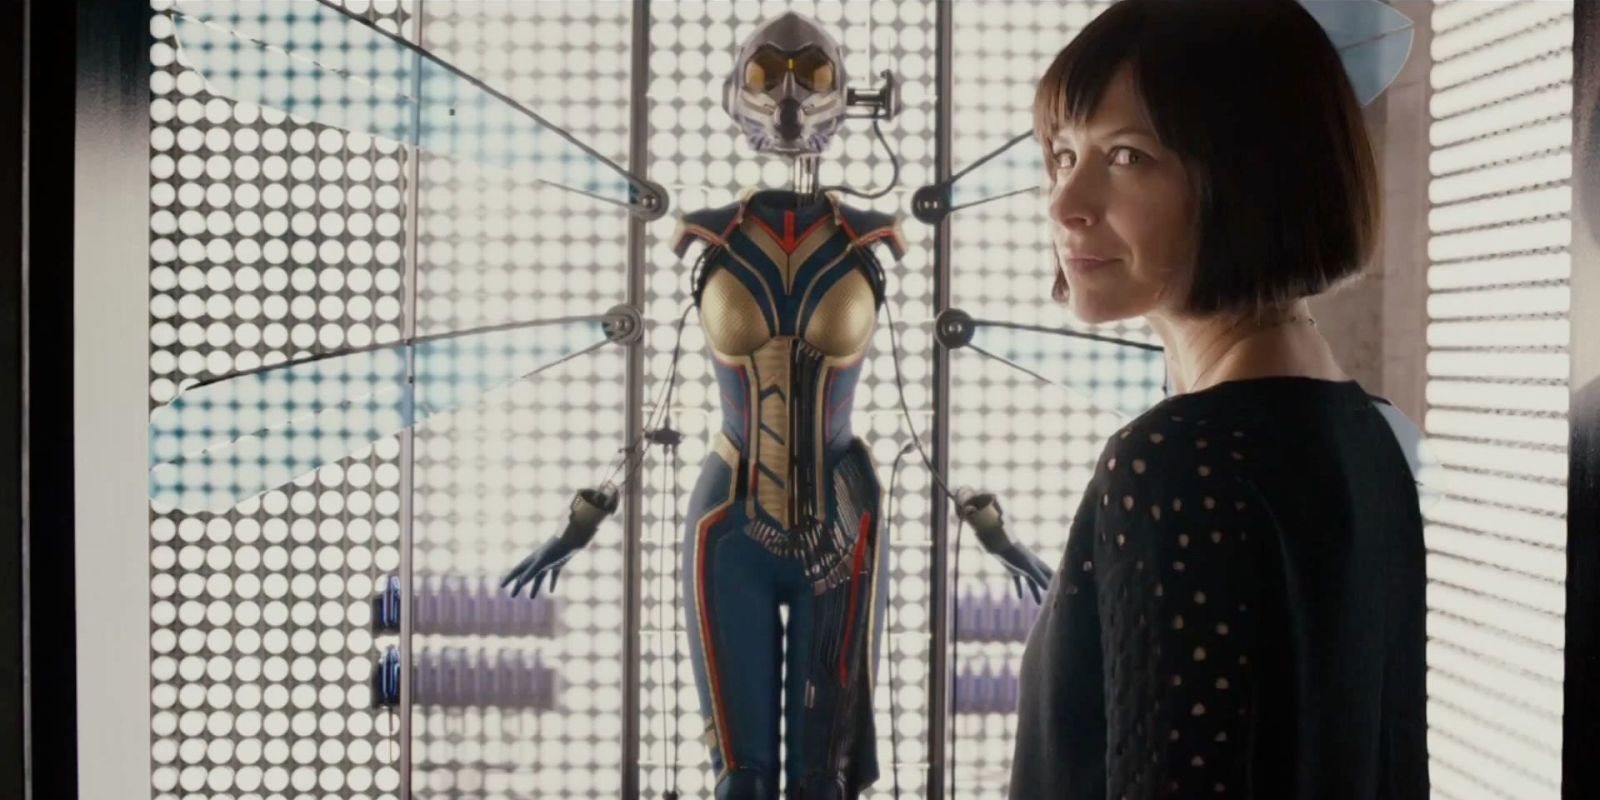 ant-man-after-credits-scene-evangeline-lily-wasp